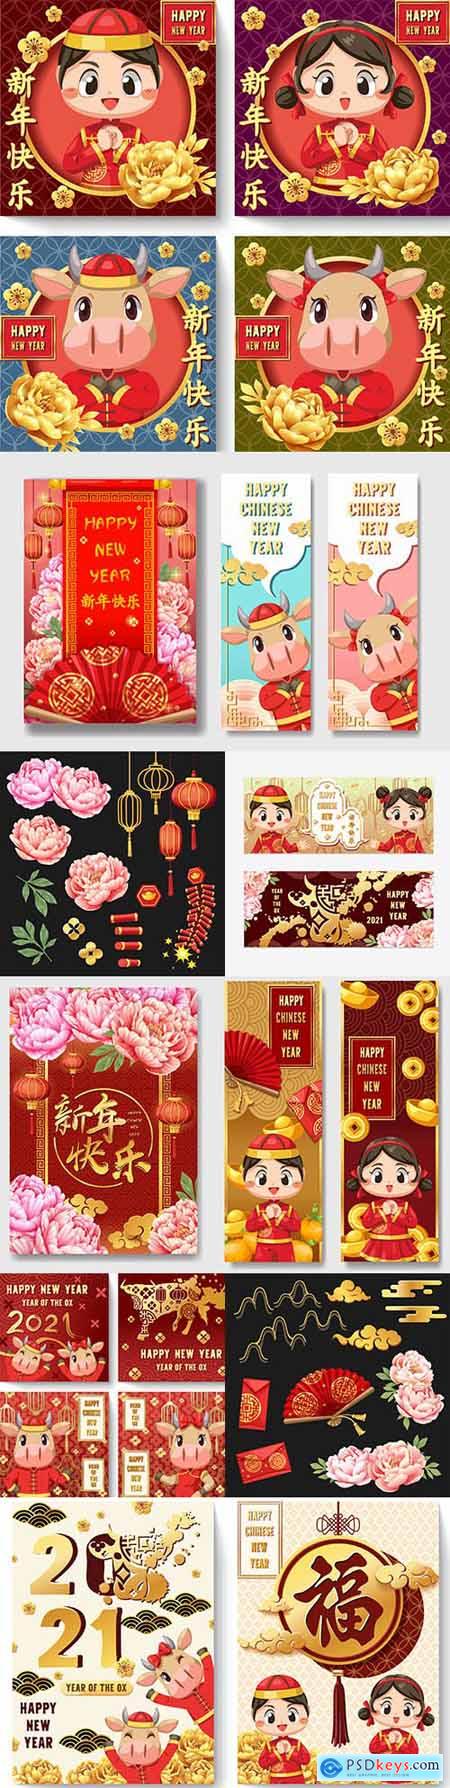 Happy Chinese New Year card and banners with elements